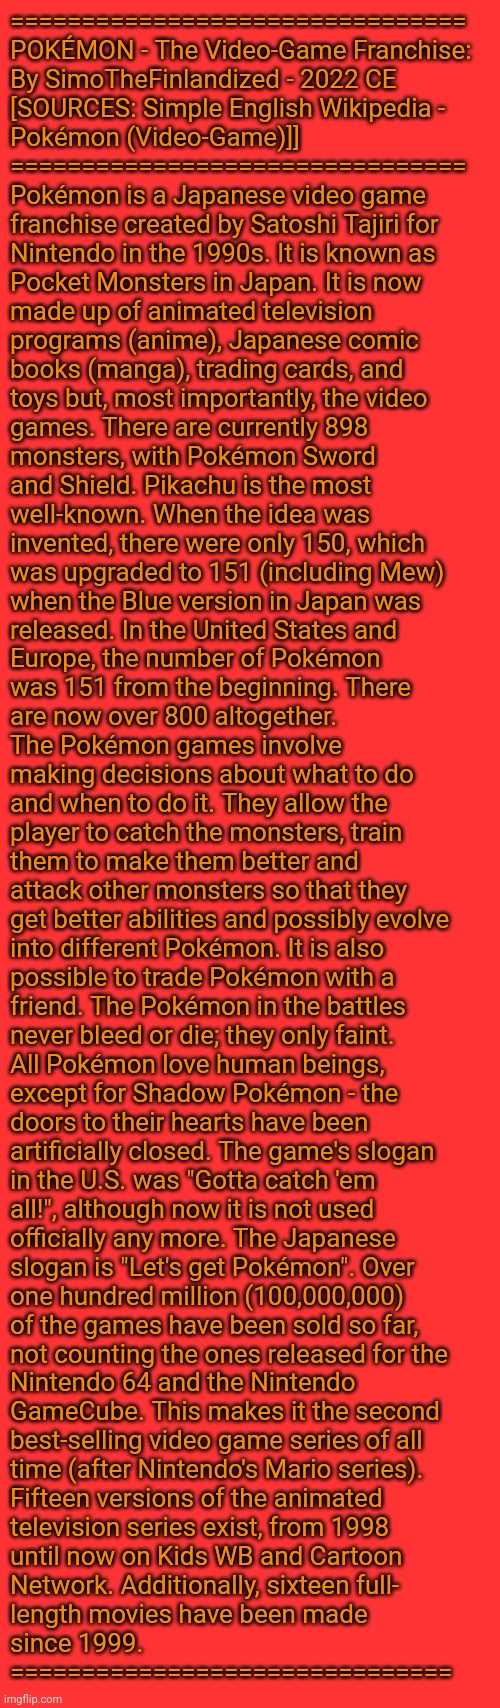 POKÉMON - The Video-Game Franchise: By SimoTheFinlandized - 2022 CE | ================================
POKÉMON - The Video-Game Franchise:
By SimoTheFinlandized - 2022 CE
[SOURCES: Simple English Wikipedia - 
Pokémon (Video-Game)]]
================================
Pokémon is a Japanese video game 
franchise created by Satoshi Tajiri for 
Nintendo in the 1990s. It is known as 
Pocket Monsters in Japan. It is now 
made up of animated television 
programs (anime), Japanese comic 
books (manga), trading cards, and 
toys but, most importantly, the video 
games. There are currently 898 
monsters, with Pokémon Sword 
and Shield. Pikachu is the most 
well-known. When the idea was 
invented, there were only 150, which 
was upgraded to 151 (including Mew) 
when the Blue version in Japan was 
released. In the United States and 
Europe, the number of Pokémon 
was 151 from the beginning. There 
are now over 800 altogether.
The Pokémon games involve 
making decisions about what to do 
and when to do it. They allow the 
player to catch the monsters, train 
them to make them better and 
attack other monsters so that they 
get better abilities and possibly evolve 
into different Pokémon. It is also 
possible to trade Pokémon with a 
friend. The Pokémon in the battles 
never bleed or die; they only faint. 
All Pokémon love human beings, 
except for Shadow Pokémon - the 
doors to their hearts have been 
artificially closed. The game's slogan 
in the U.S. was "Gotta catch 'em 
all!", although now it is not used 
officially any more. The Japanese 
slogan is "Let's get Pokémon". Over 
one hundred million (100,000,000)
of the games have been sold so far, 
not counting the ones released for the 
Nintendo 64 and the Nintendo 
GameCube. This makes it the second 
best-selling video game series of all 
time (after Nintendo's Mario series).
Fifteen versions of the animated 
television series exist, from 1998 
until now on Kids WB and Cartoon 
Network. Additionally, sixteen full-
length movies have been made 
since 1999.
=============================== | image tagged in simothefinlandized,video games,anime,manga,pokemon,essay | made w/ Imgflip meme maker